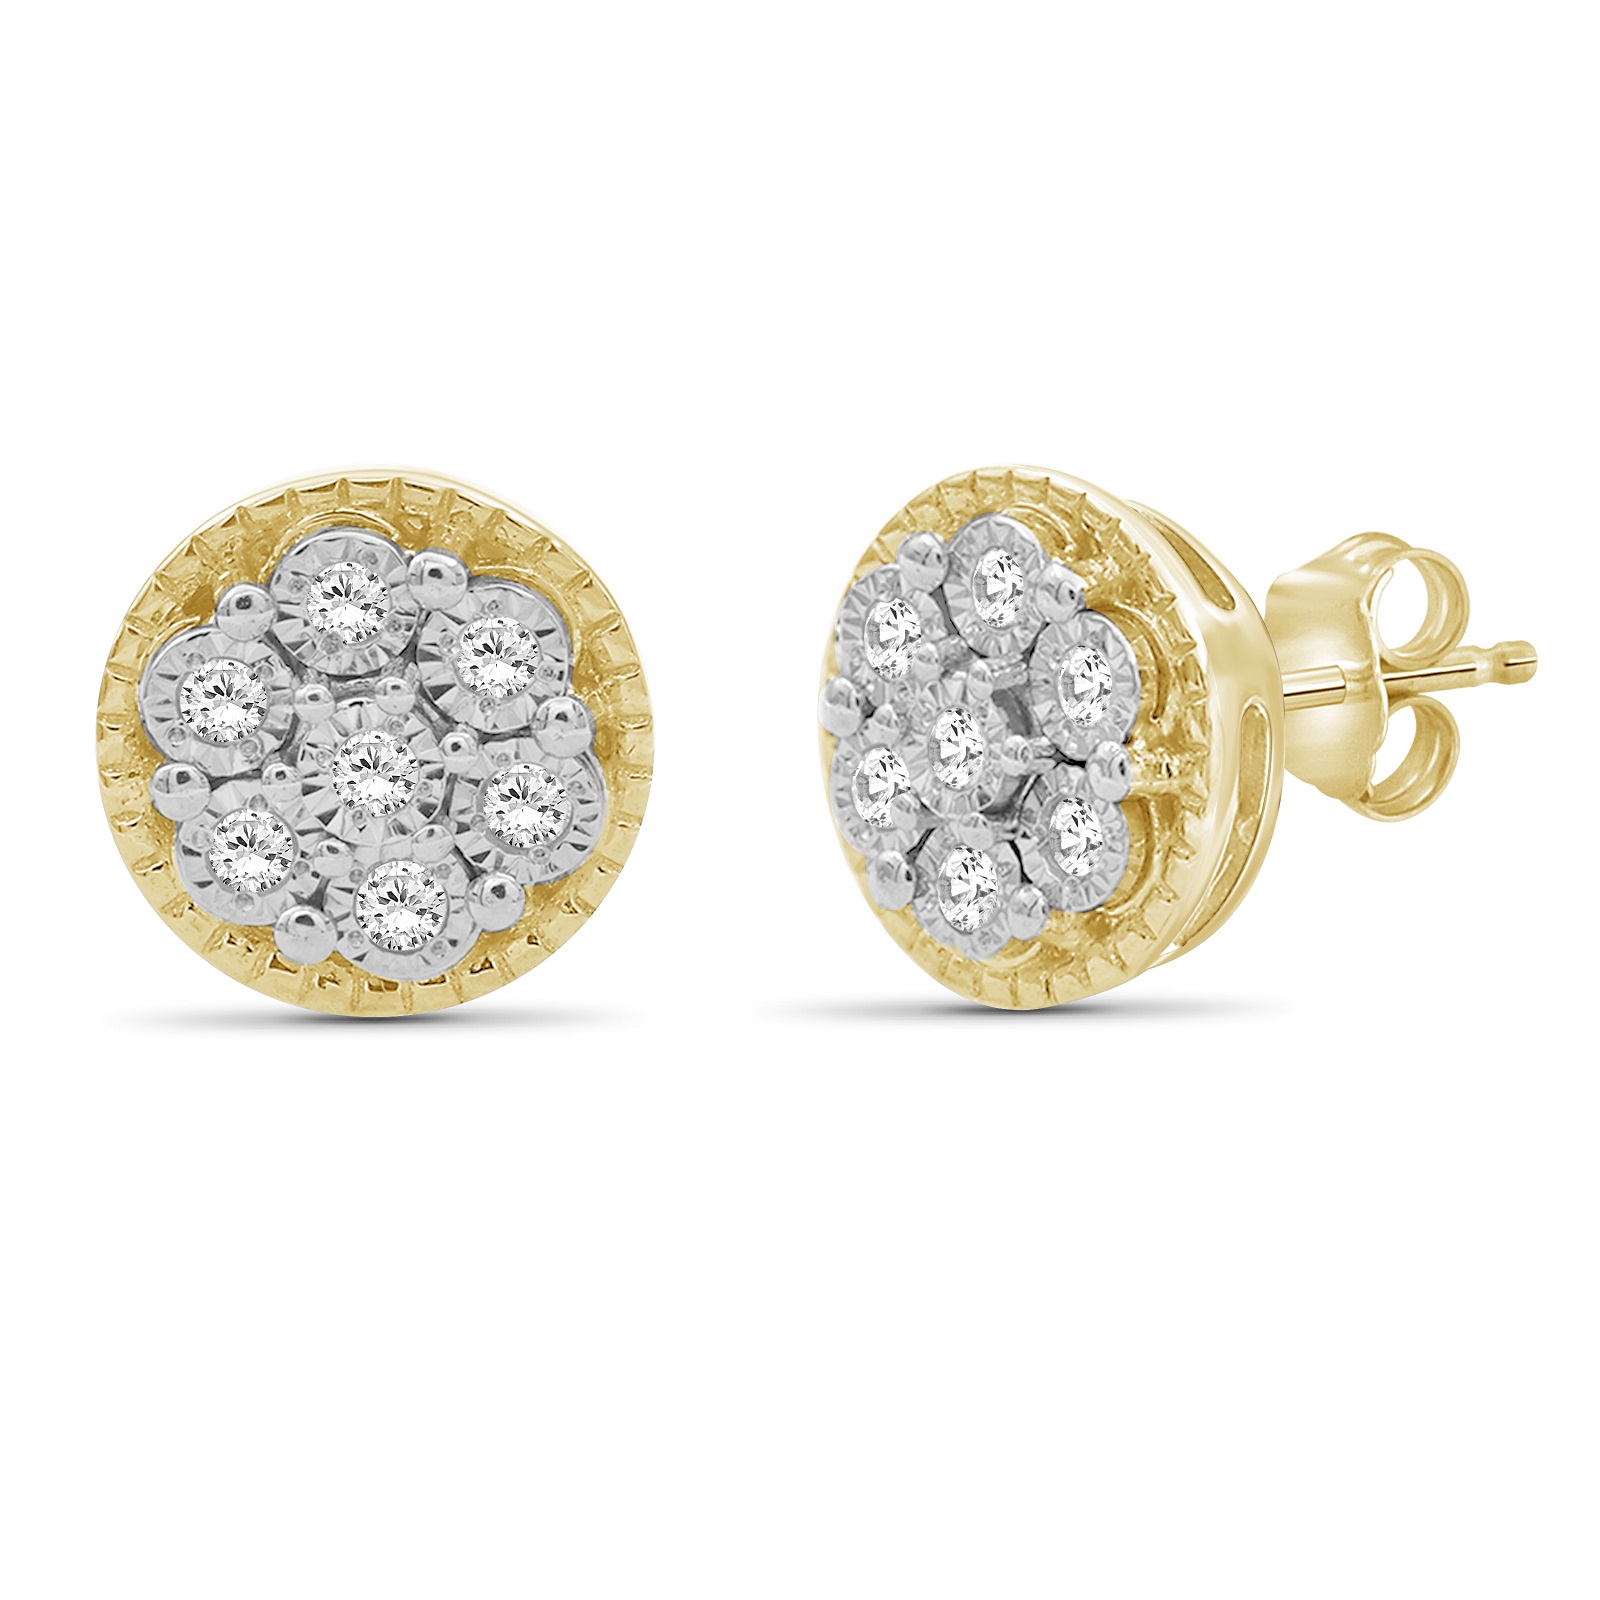 1/10 Ctw White Diamond Earrings in Gold over Silver